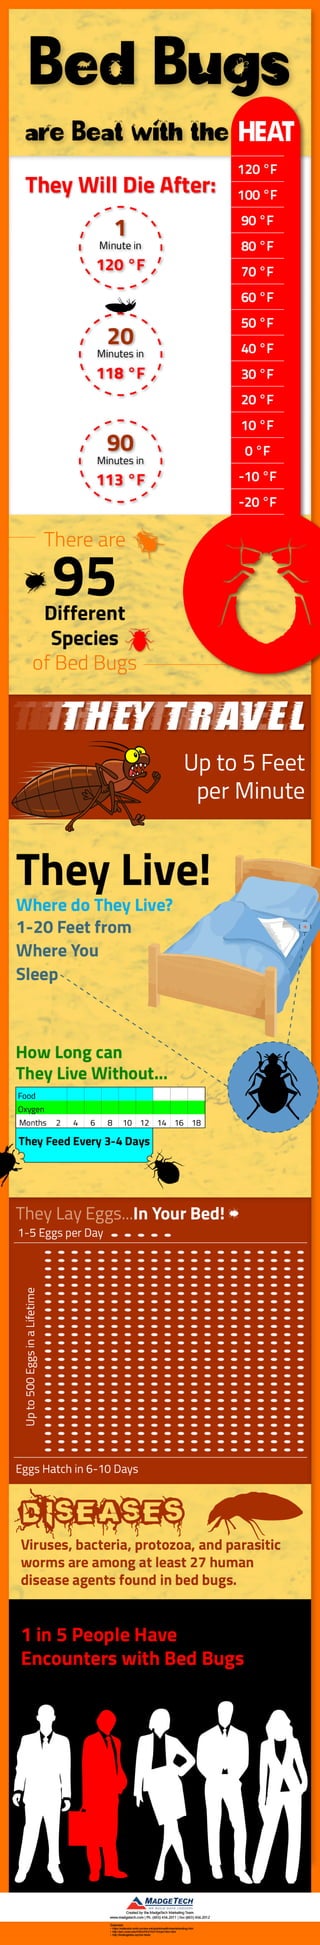 Bed Bugs Infographic